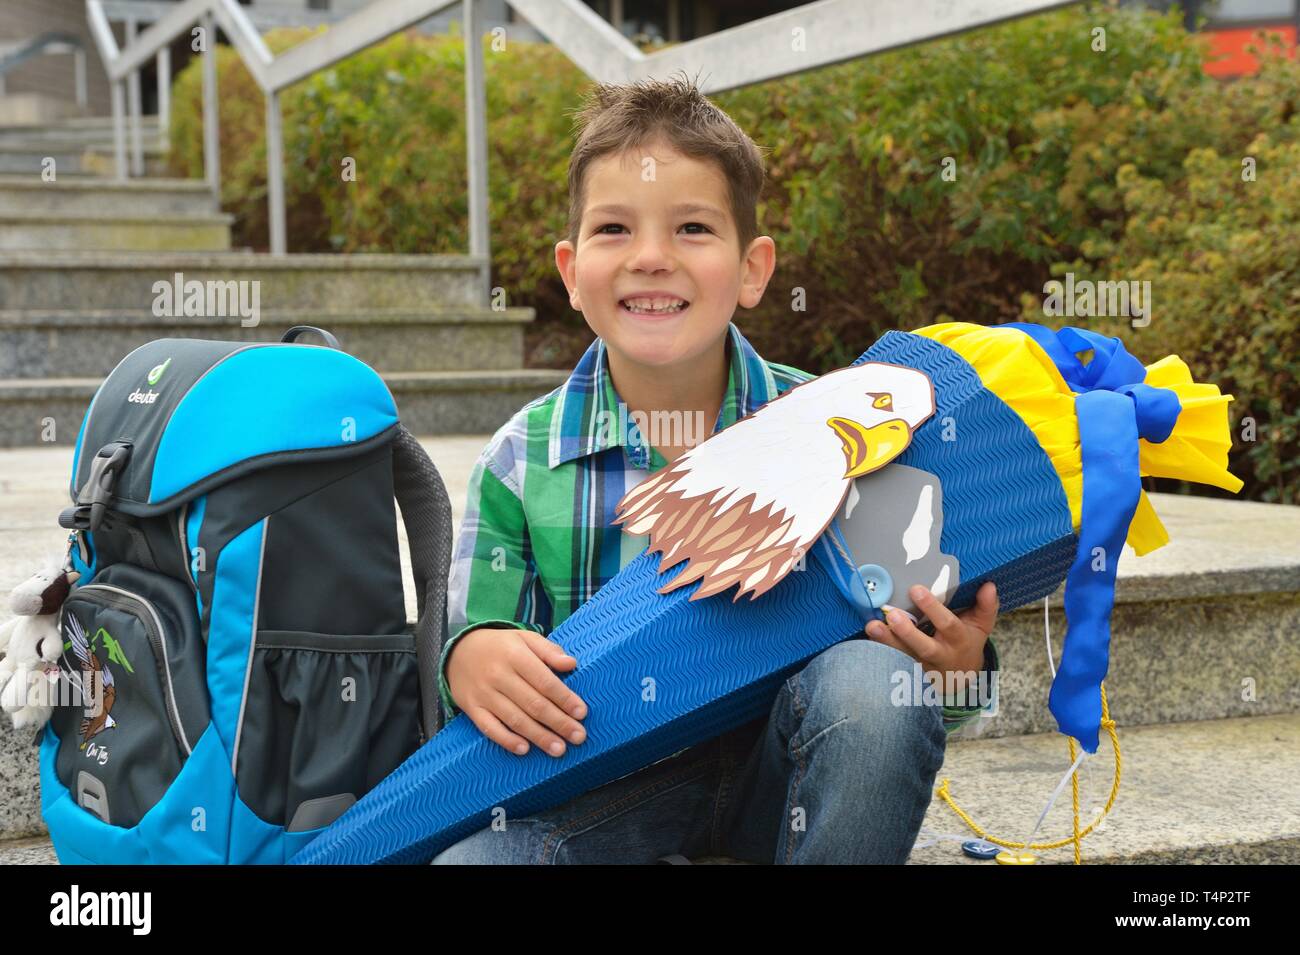 Boy, 6 years, first day at school with school bag and school cone, Portrait, Germany Stock Photo